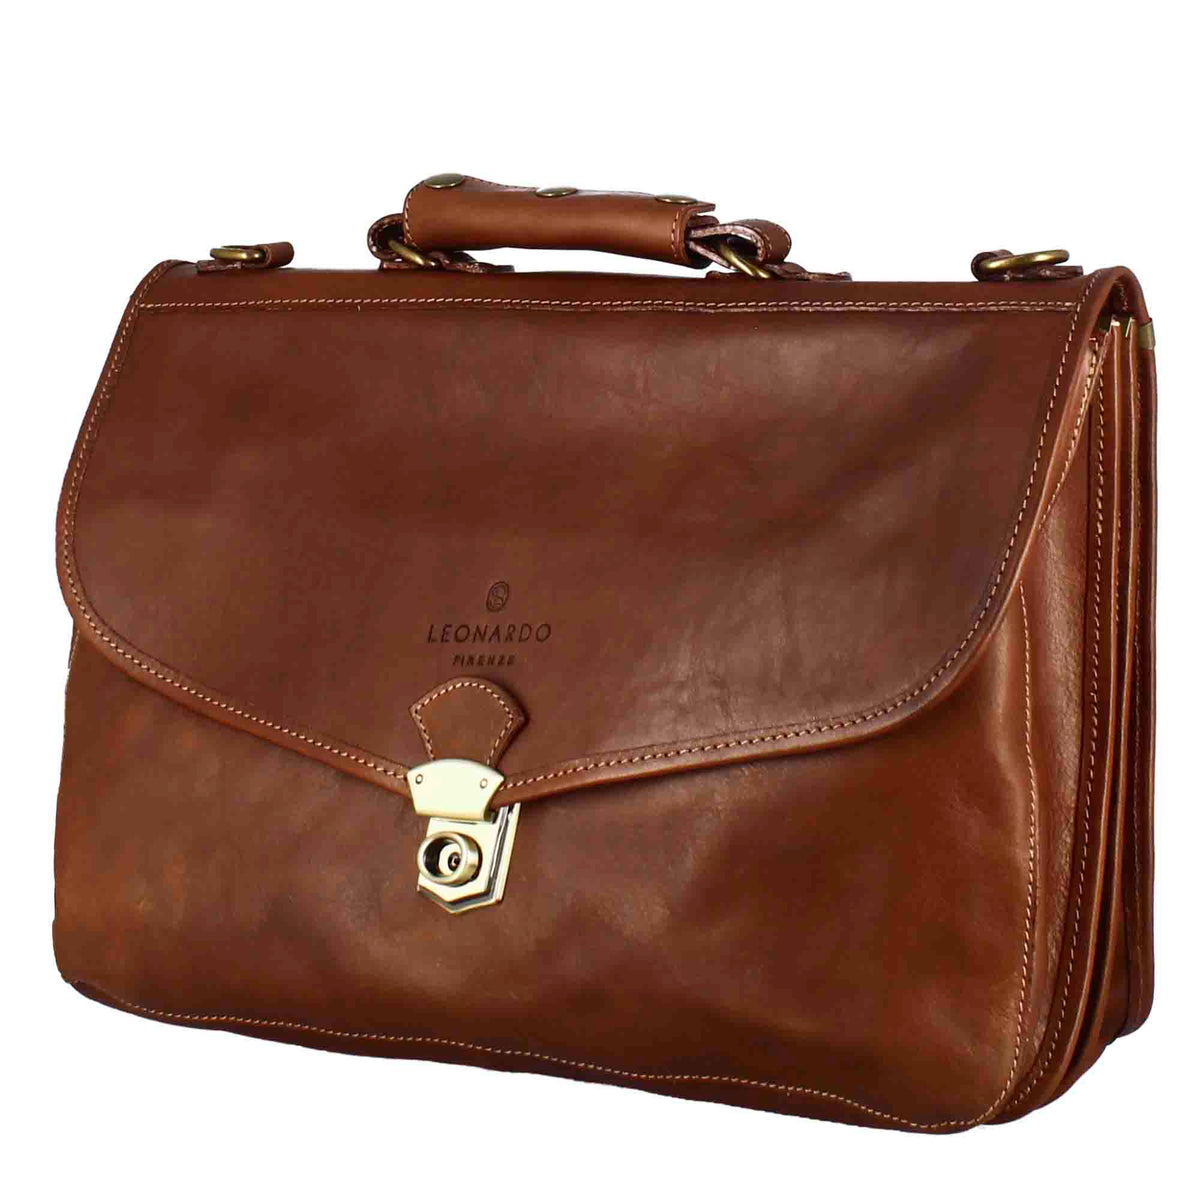 Brown full-grain leather professional briefcase with flap closure